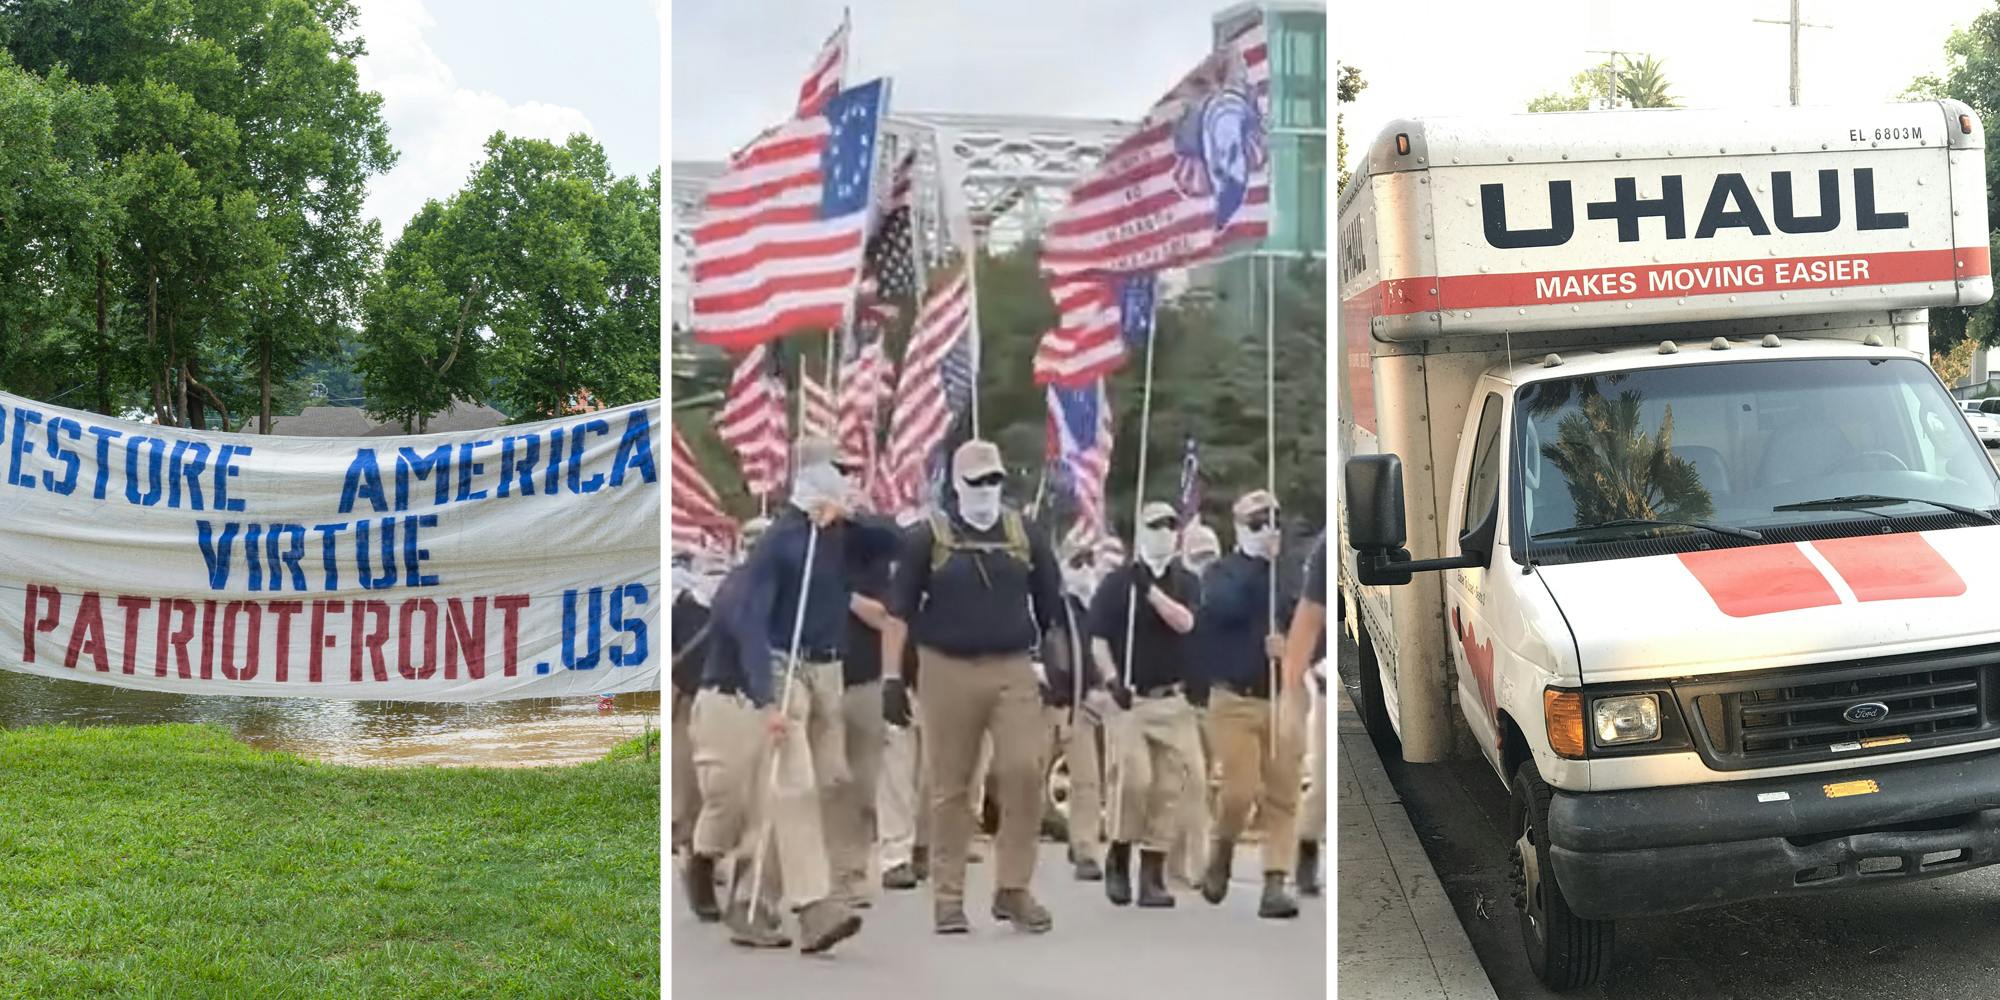 Patriot Front flag(l), white supremacists with flags(c), Uhaul(r)